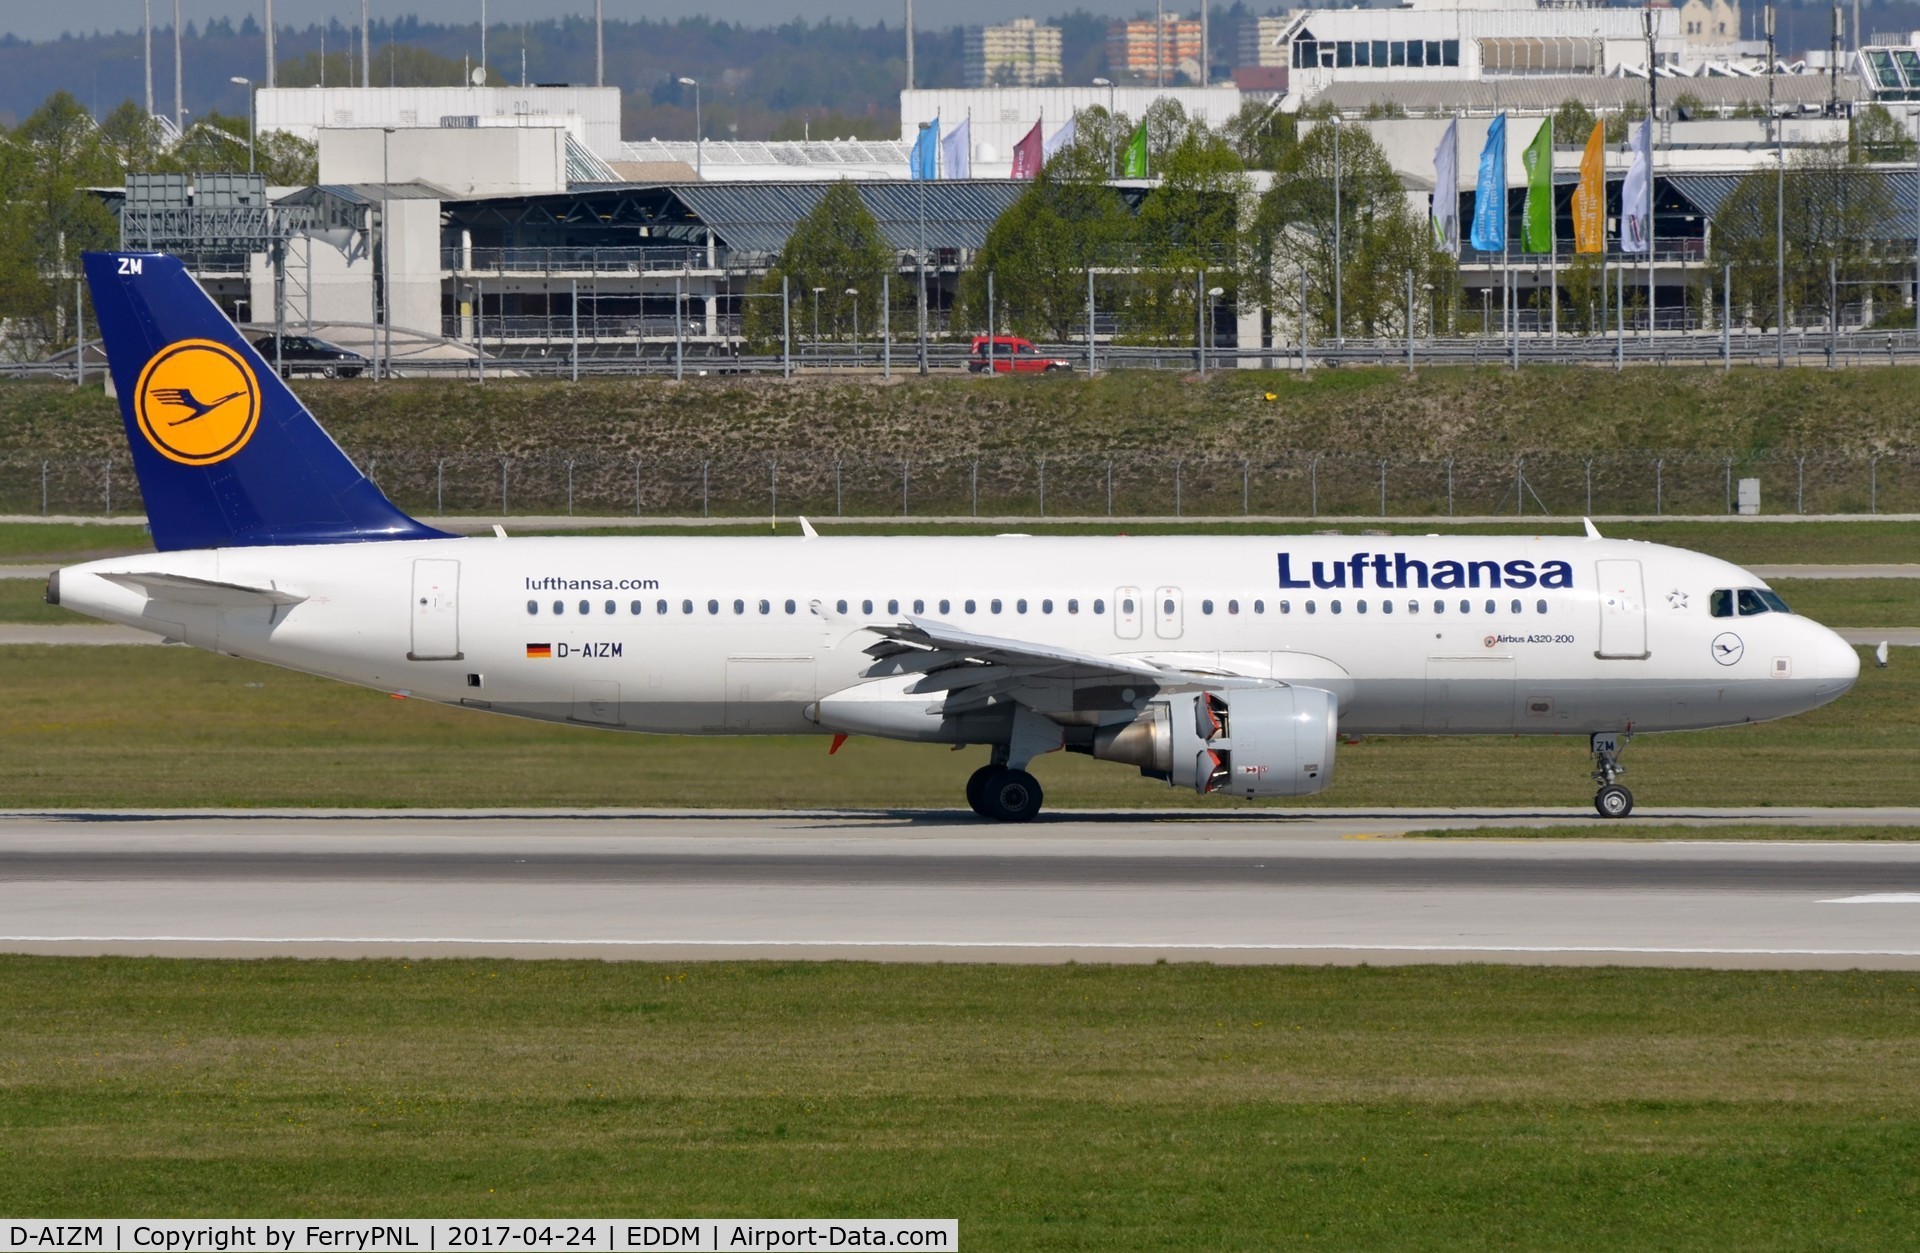 D-AIZM, 2012 Airbus A320-214 C/N 5203, Lufthansa A320 vacating the runway